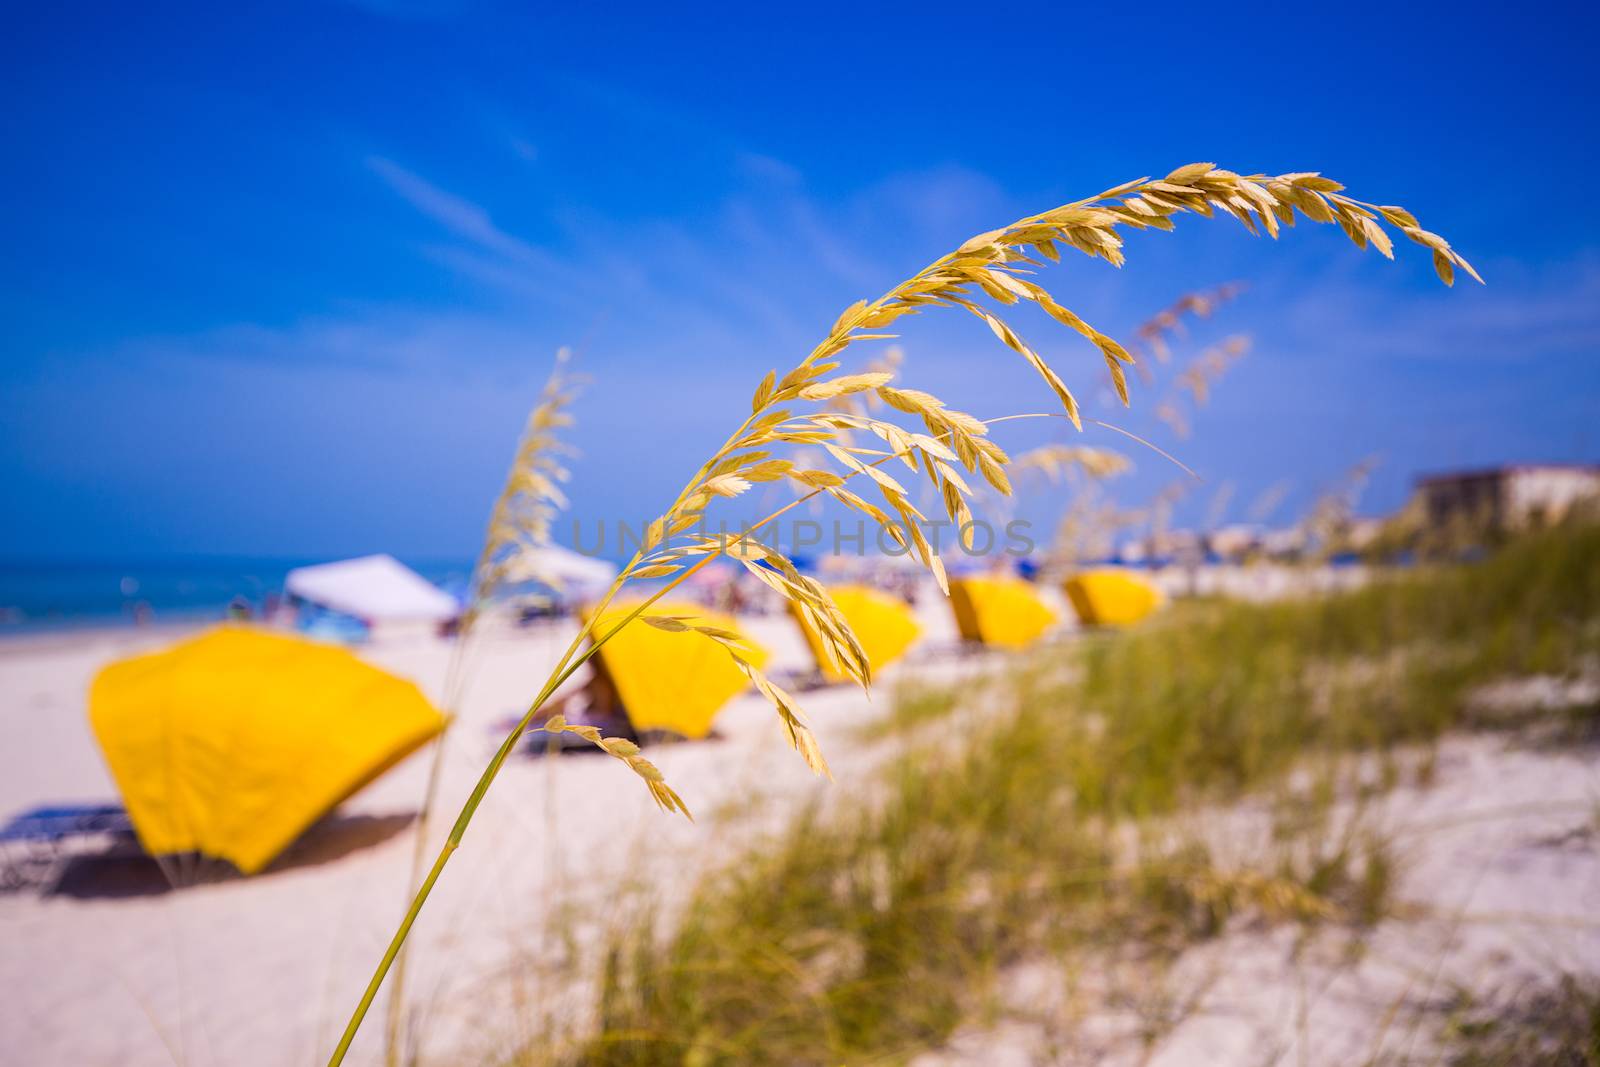 Madiera Beach and sea oats in Florida by steheap